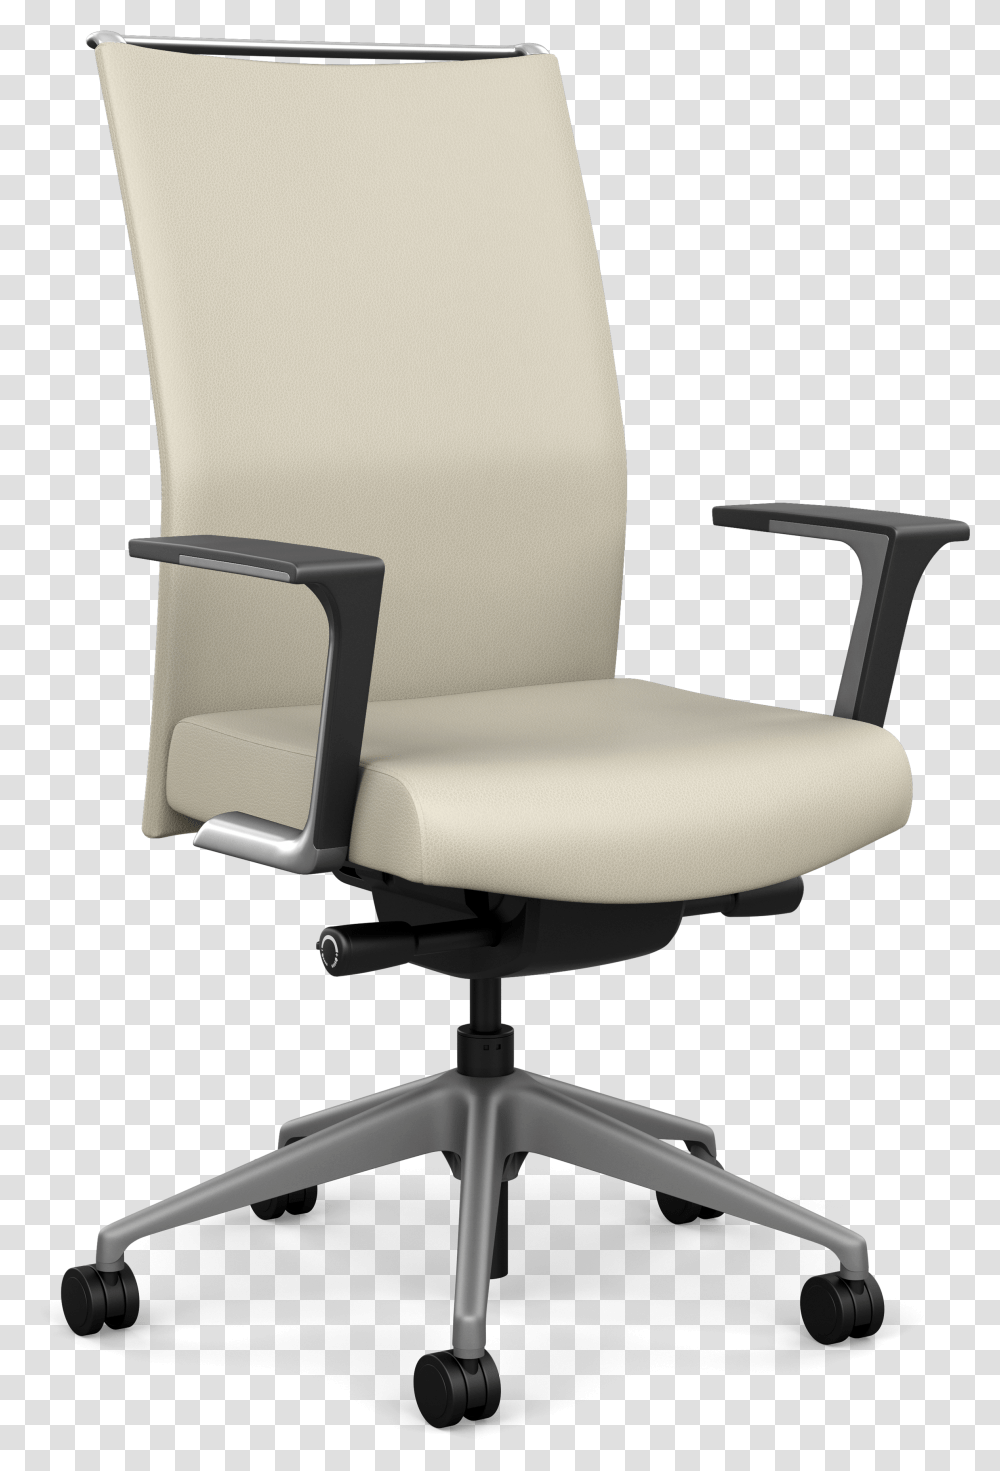 Sona Sitonit Chair Transparent Png